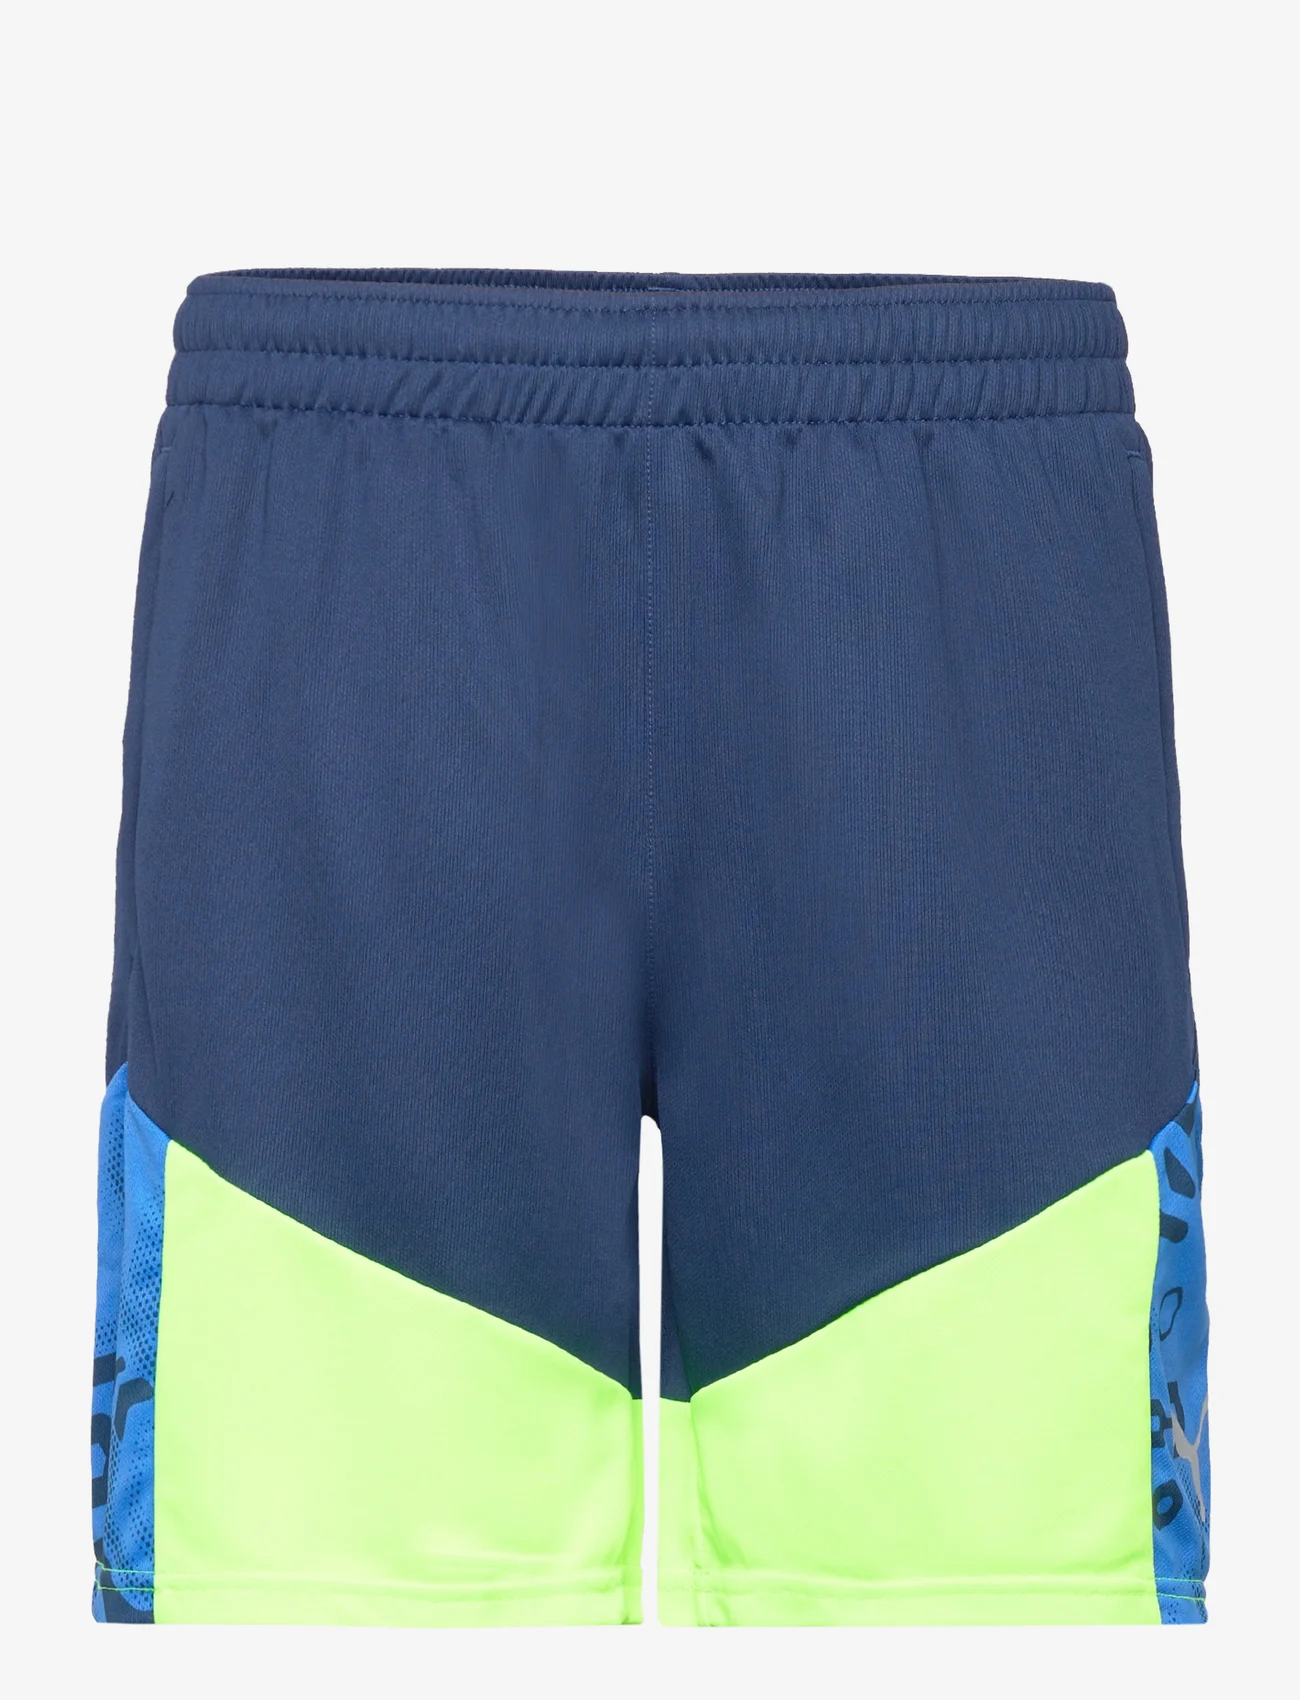 PUMA - individualCUP Shorts - lowest prices - persian blue-pro green - 0